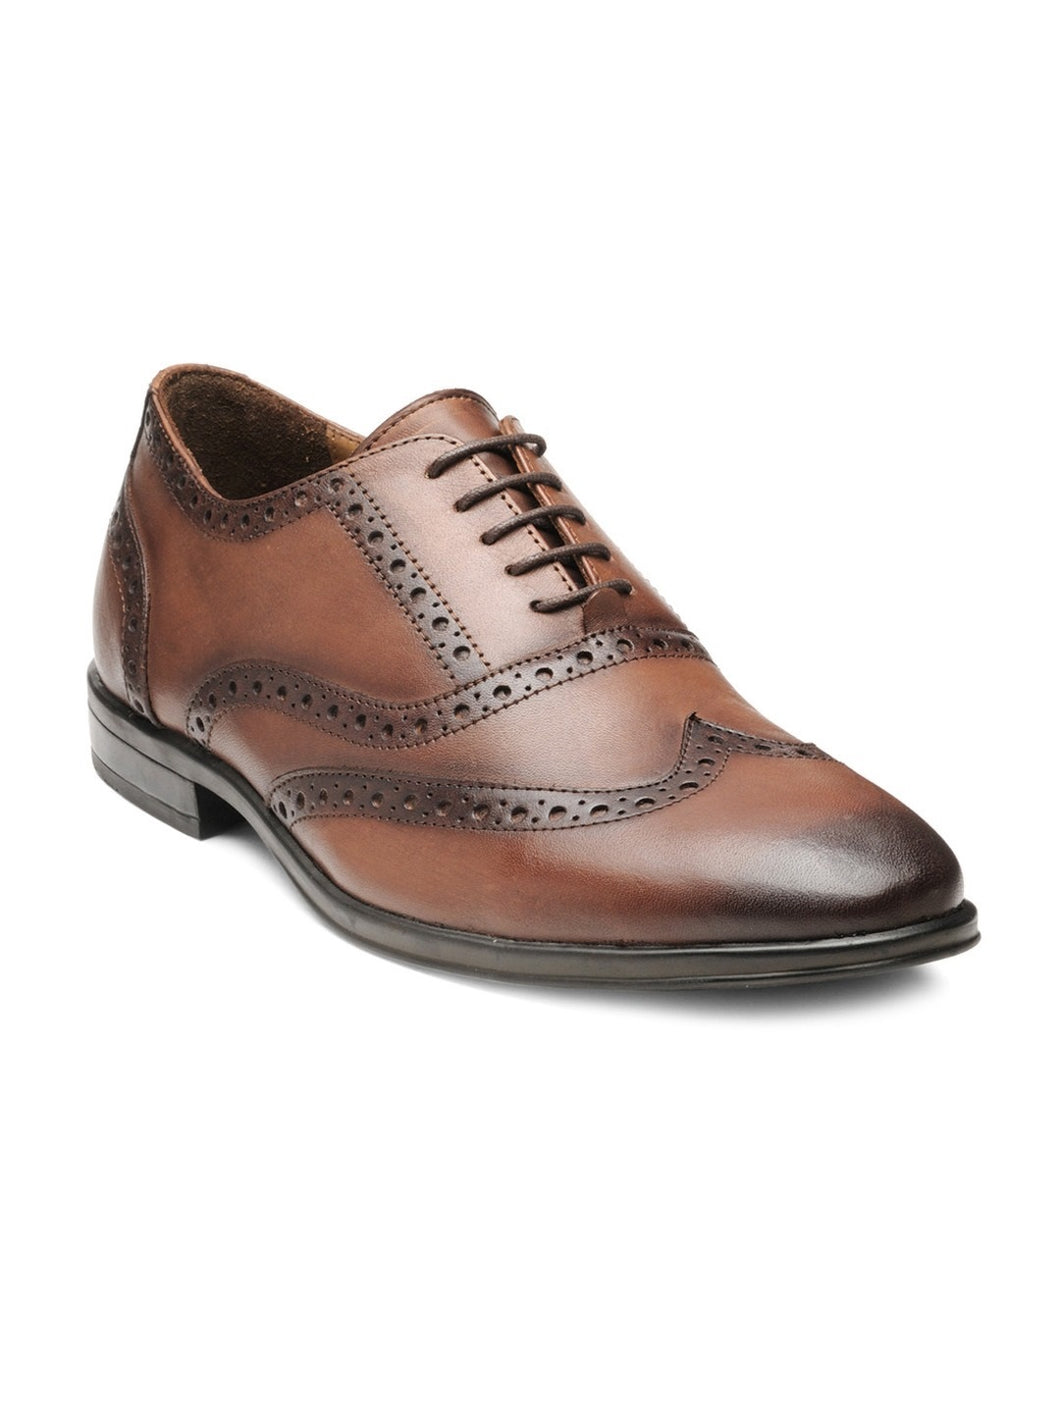 Men Brown Solid Leather Round Toe Formal Brogues